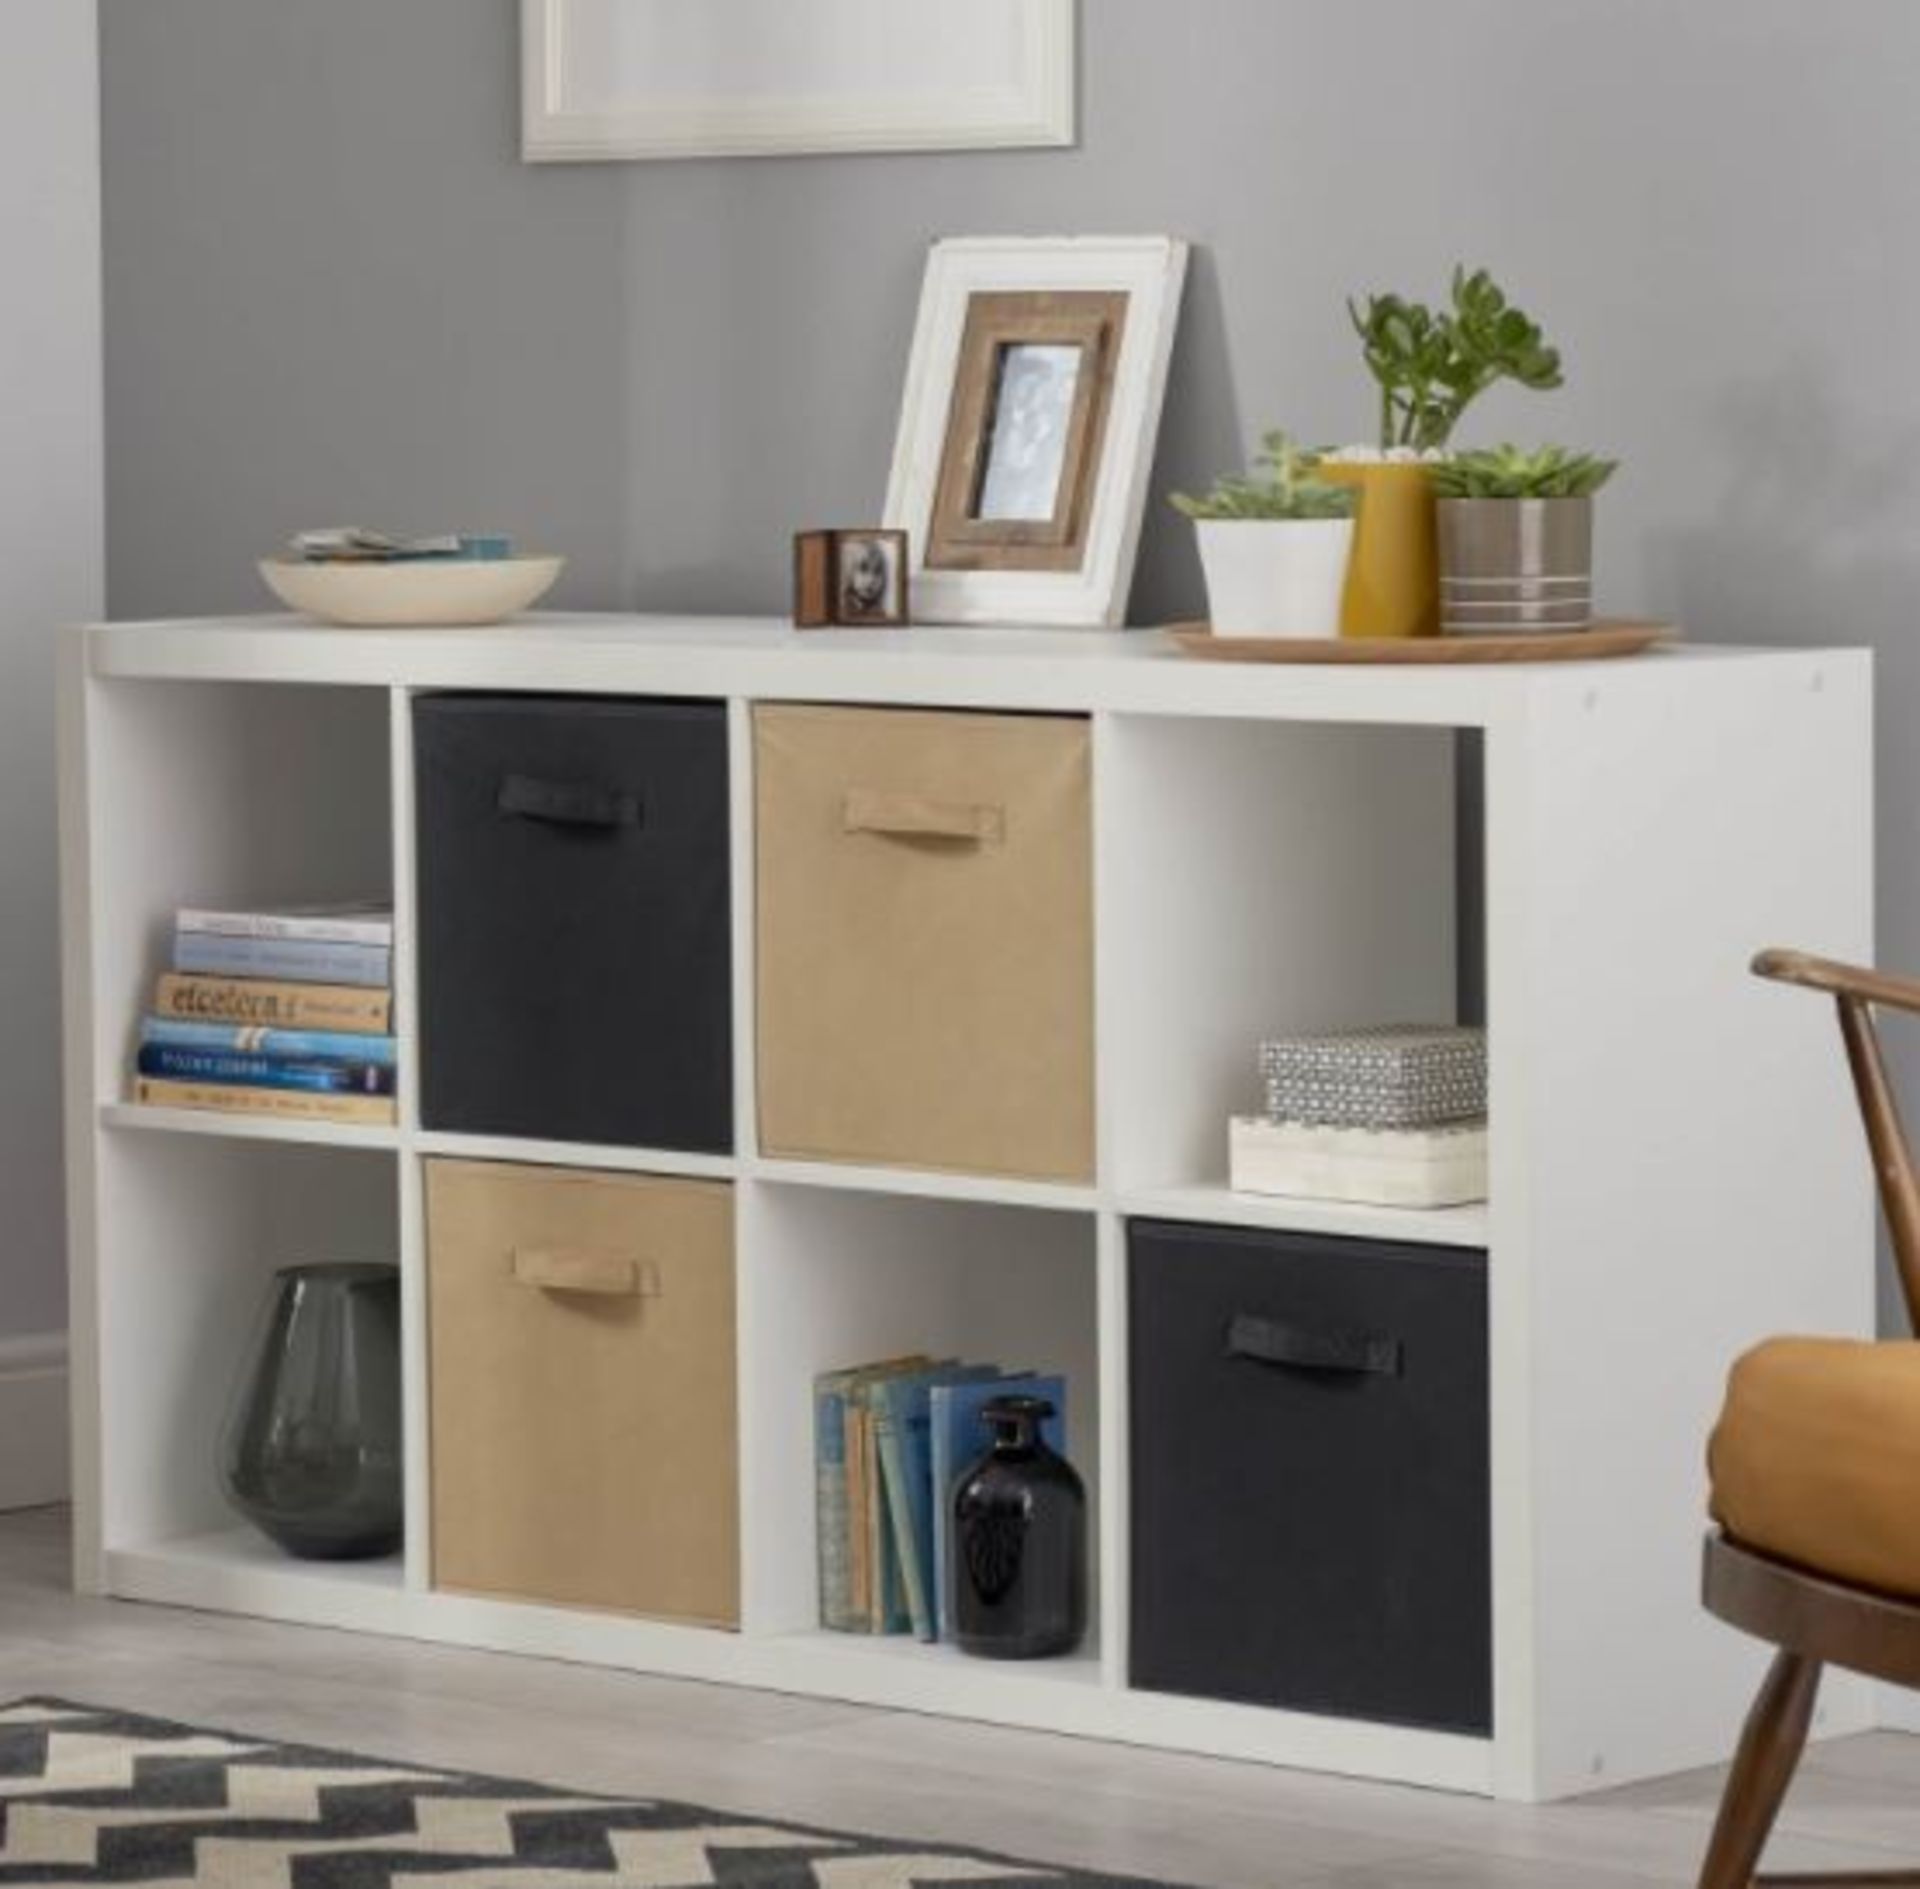 (R7L) Household. 1 X Living Elements Clever Cube 2 X 4 Cube Storage Unit White Matt Finish. (H1460 - Image 2 of 4